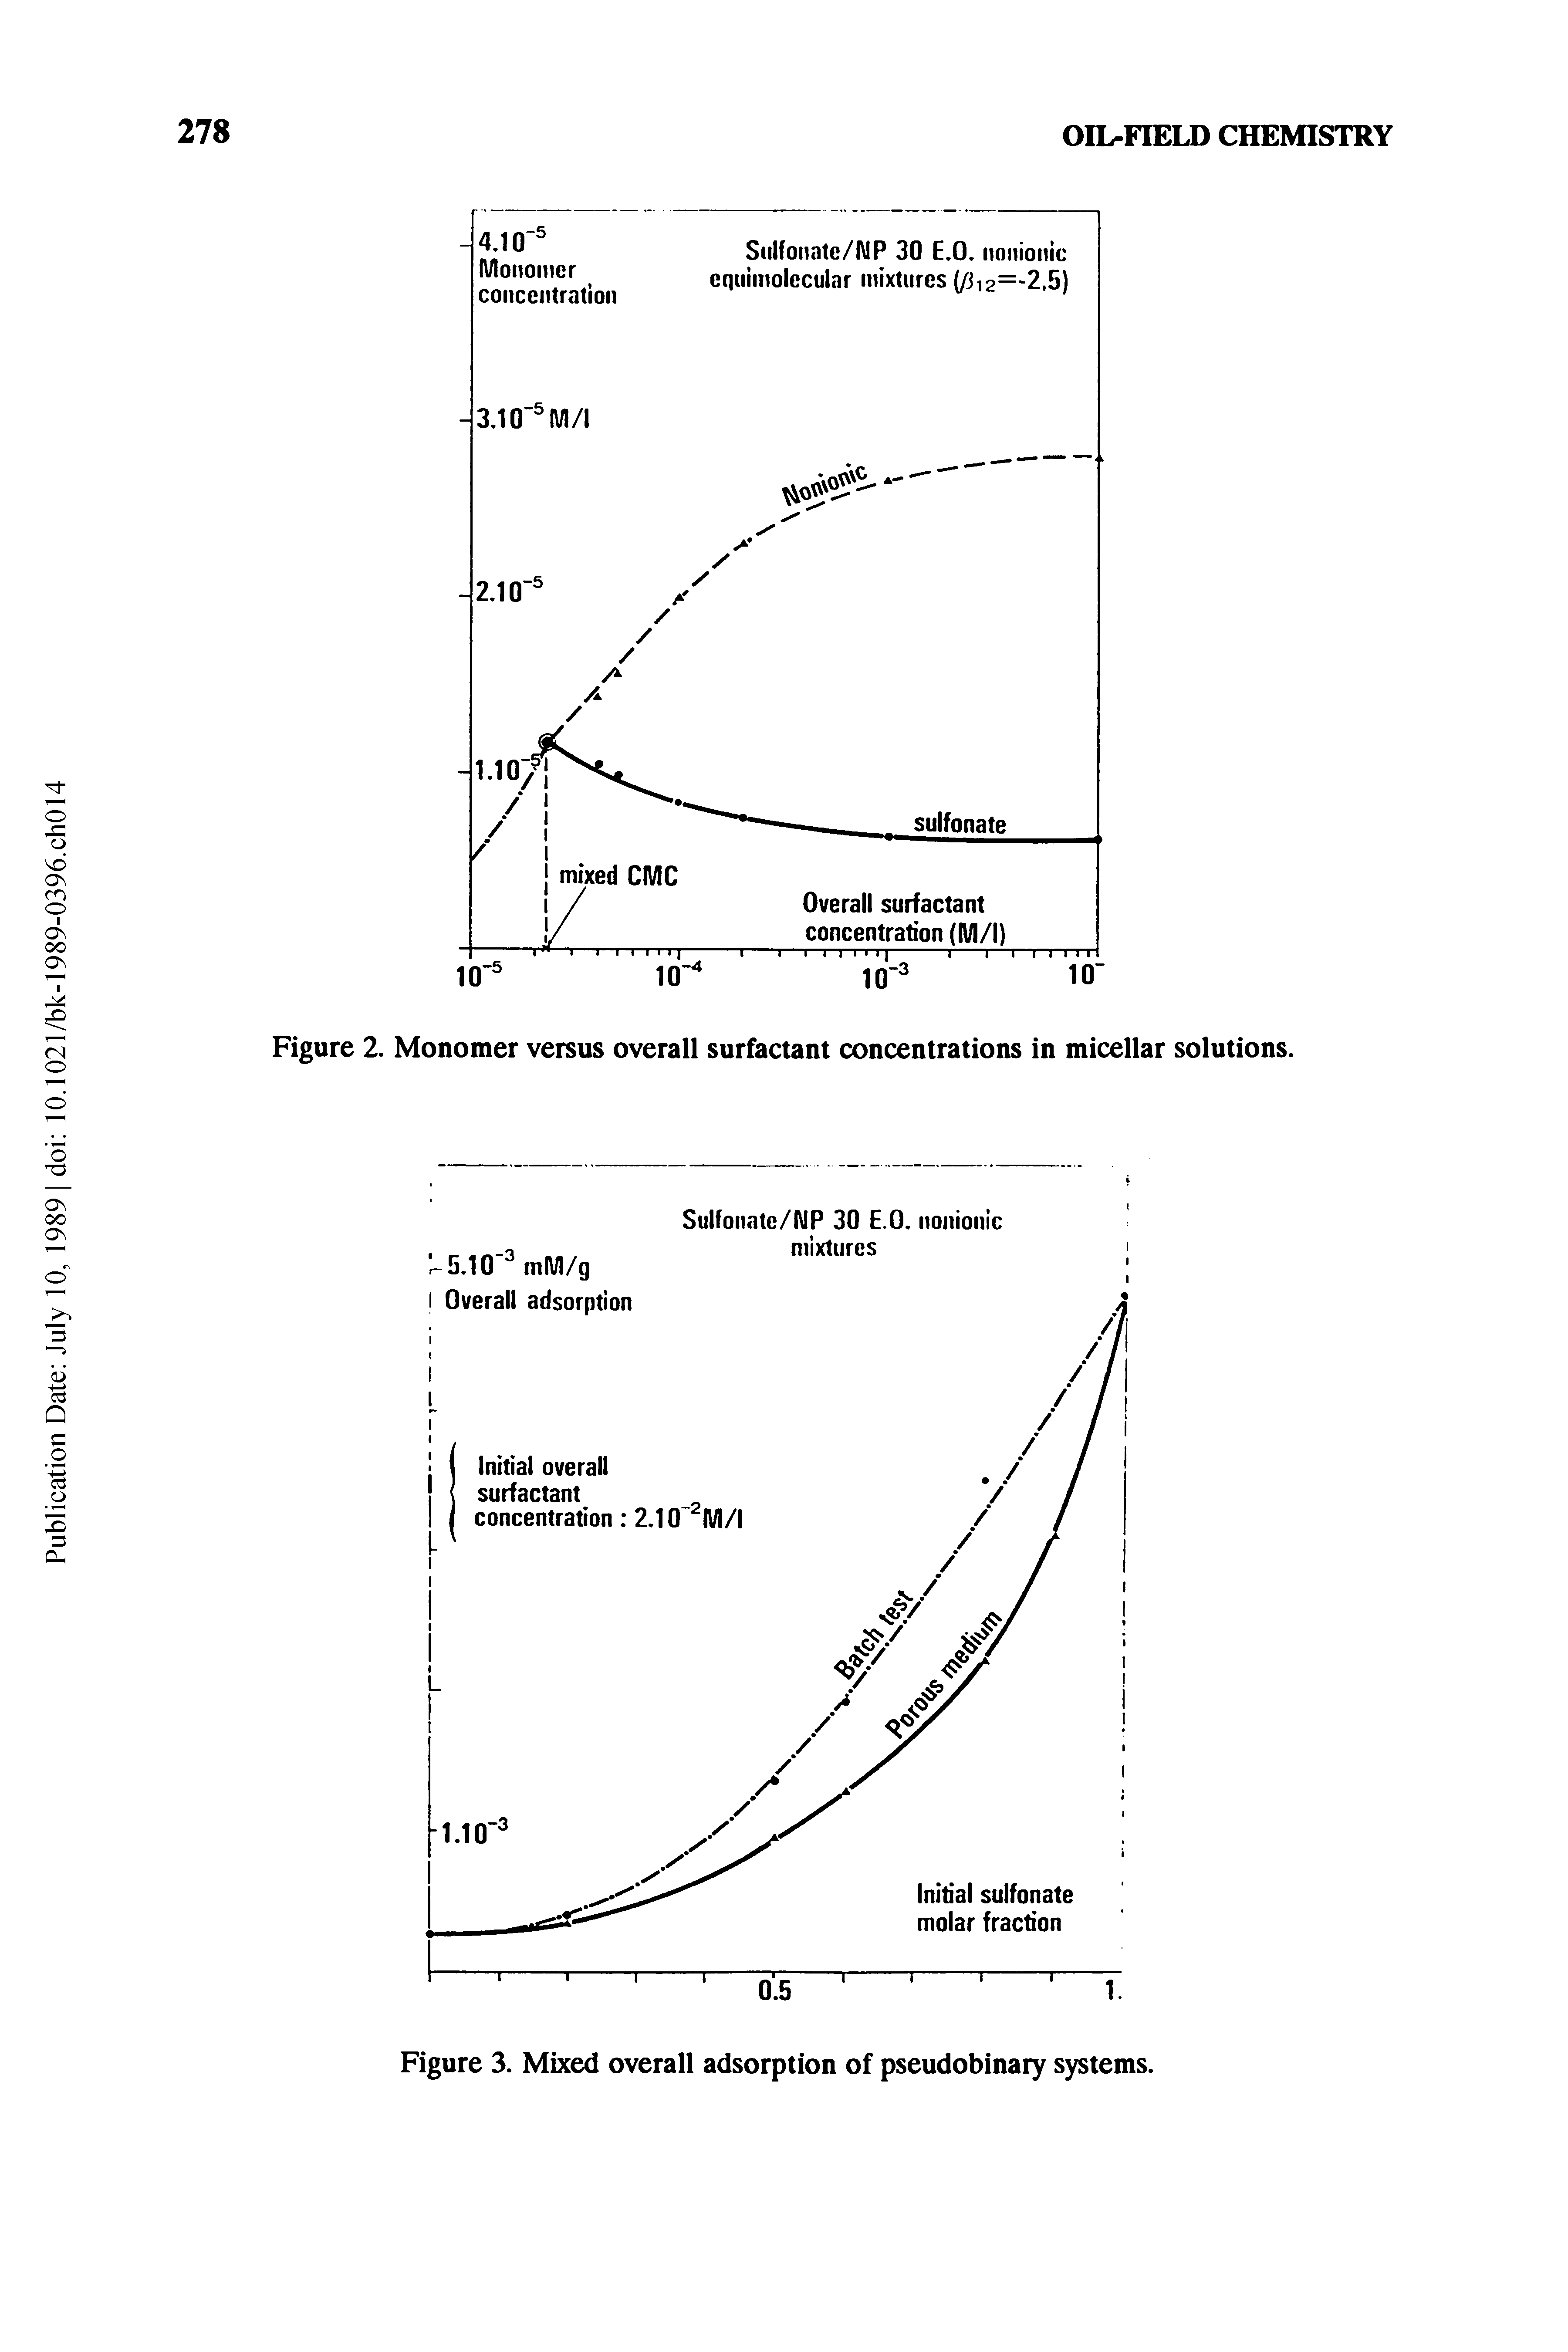 Figure 3. Mixed overall adsorption of pseudobinary systems.